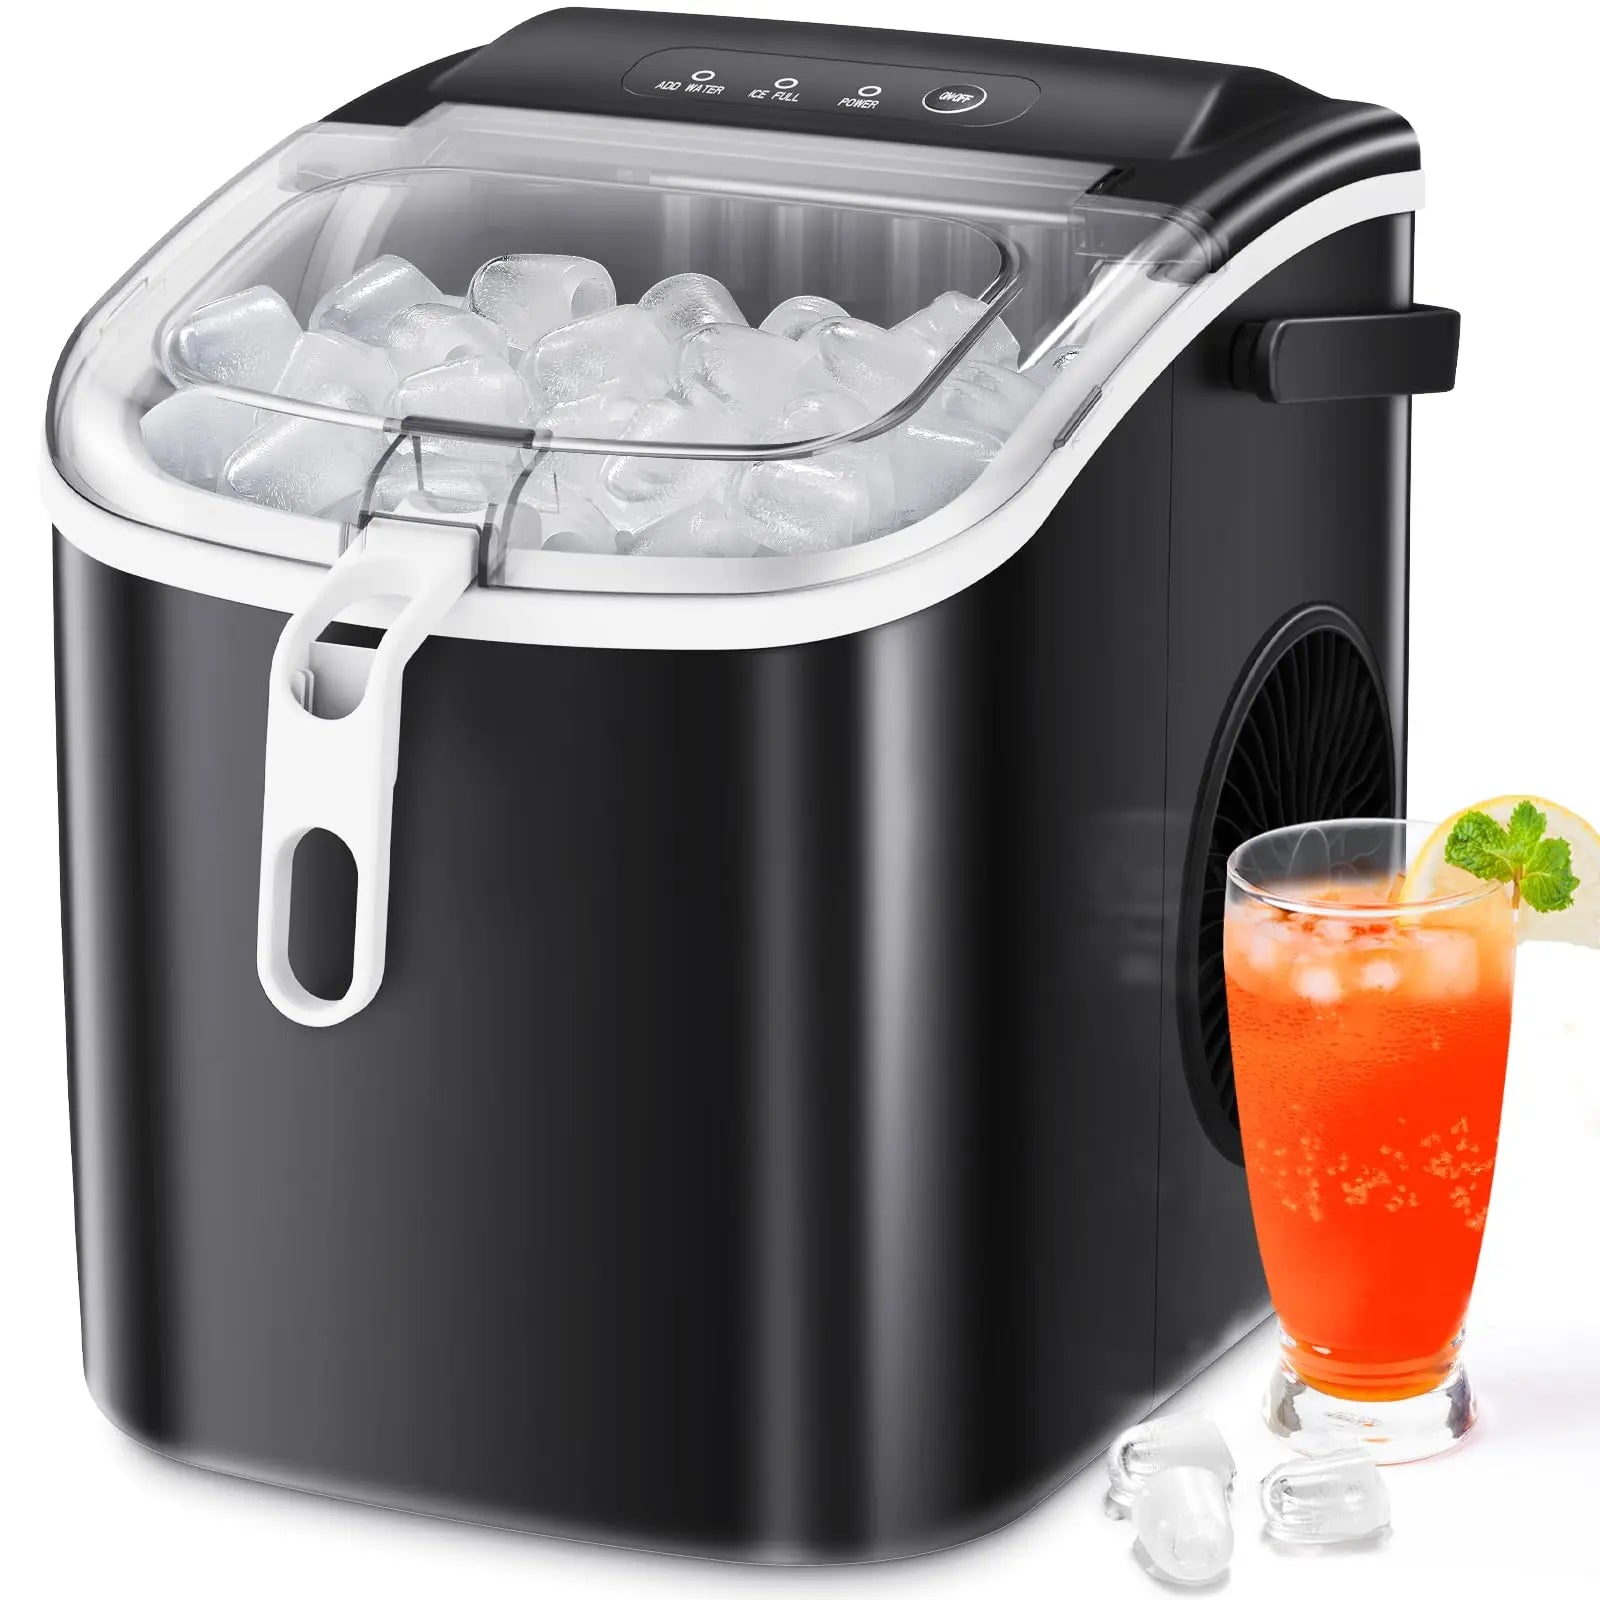 KISSAIR Countertop Ice Maker Machine 6-Minute Fast Bullet Ice